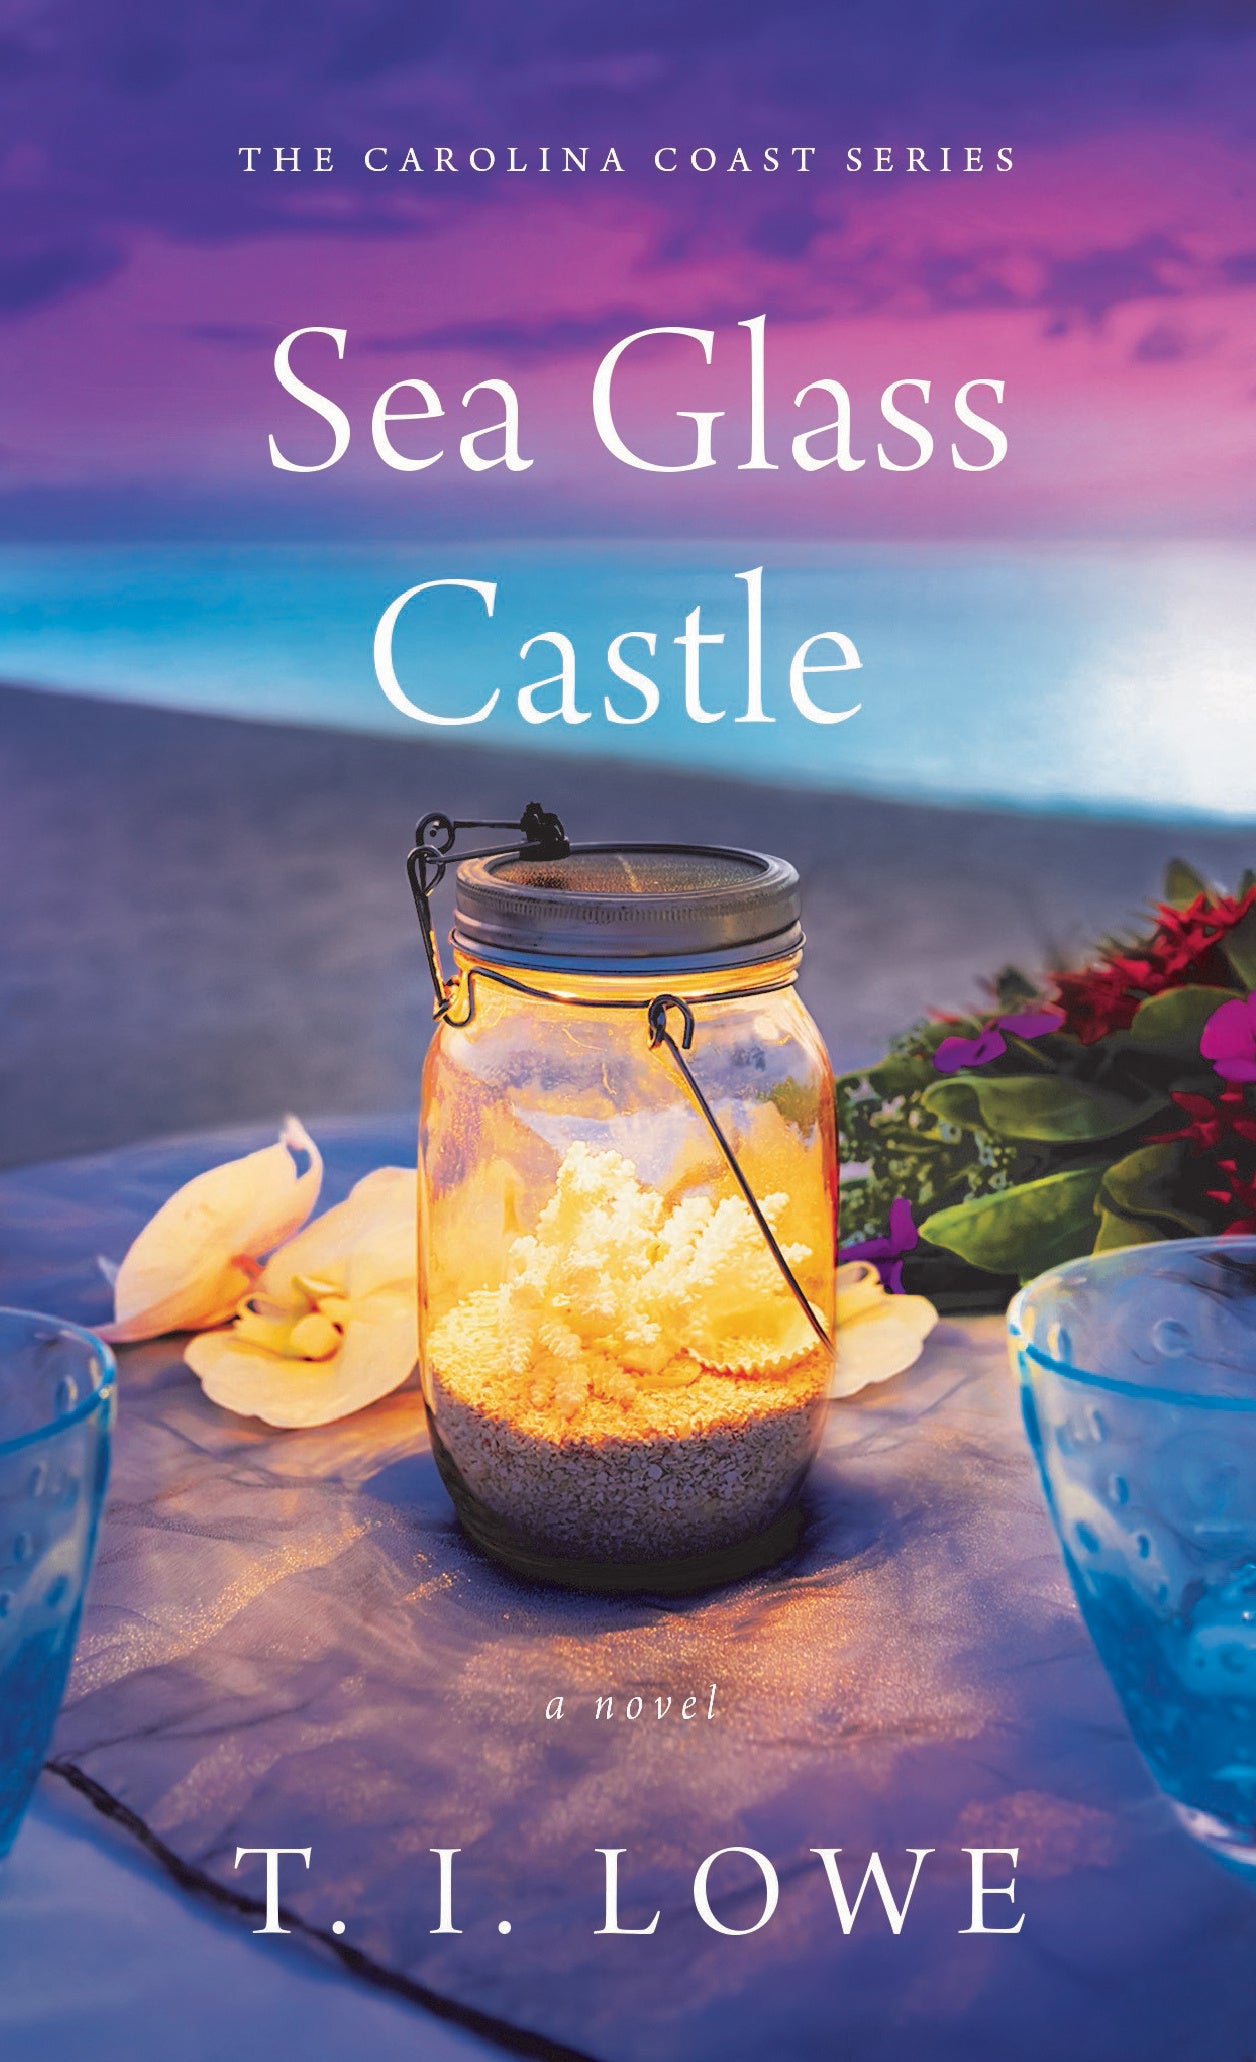 Image of Sea Glass Castle other